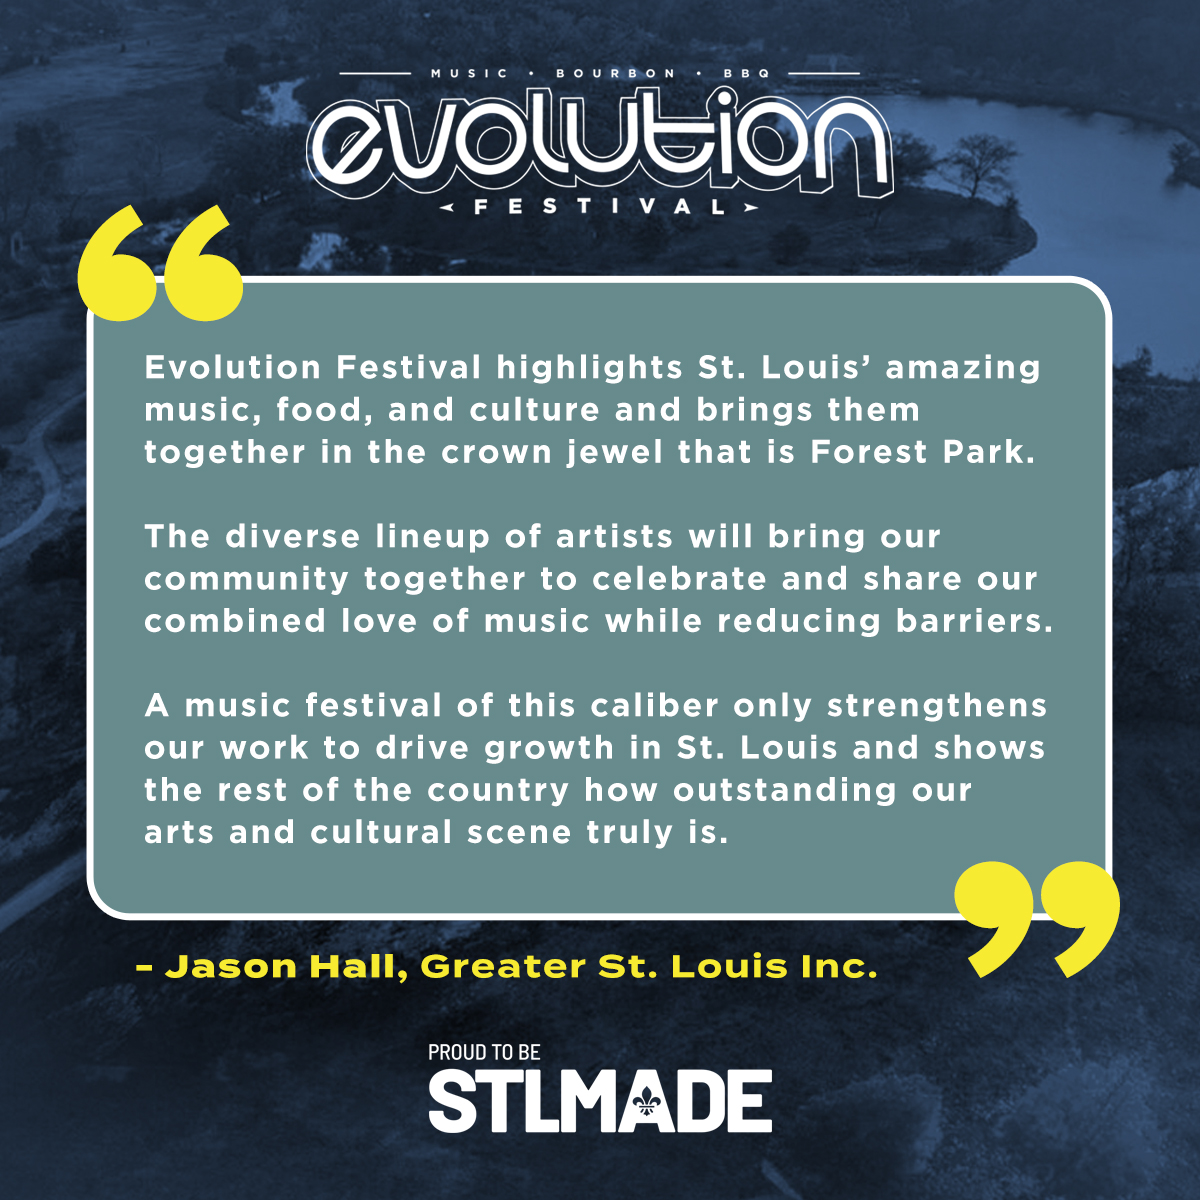 We are SO proud to be #STLMade, and to join hands with @greaterstlinc to elevate our vibrant hometown to new heights!